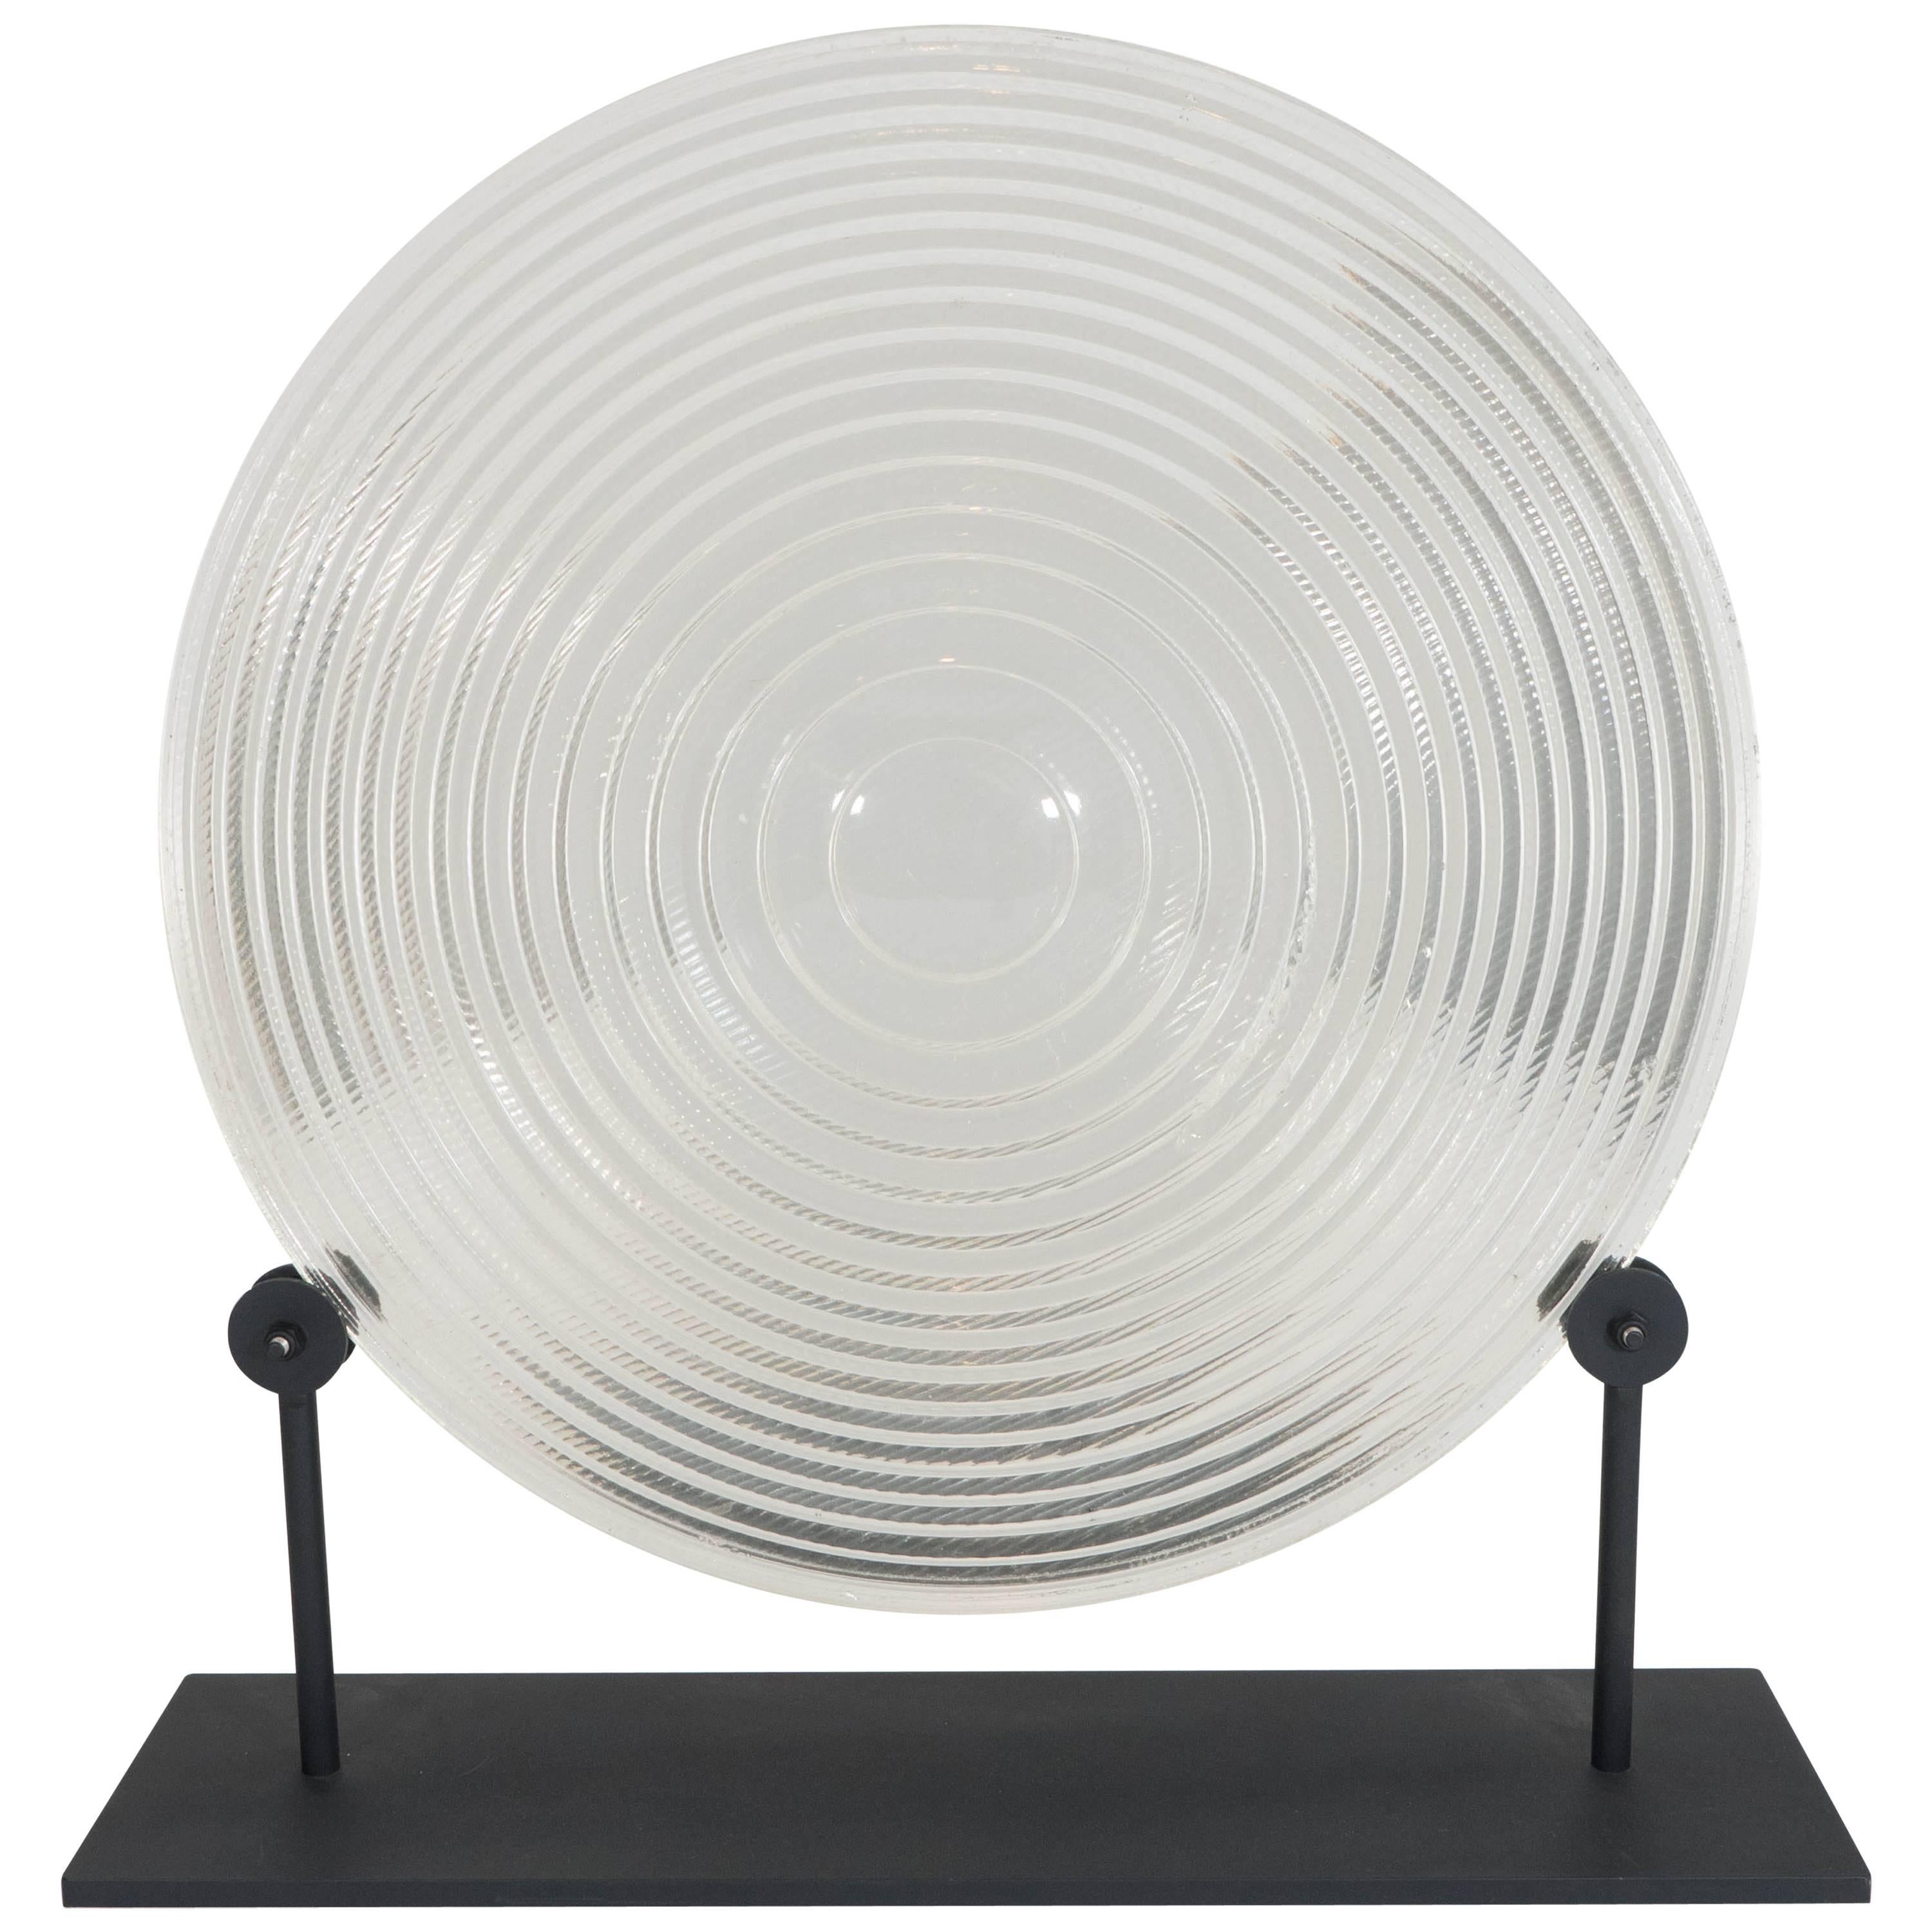 Round Optical Fresnel Lens in Borosilicate Glass on Display Stand